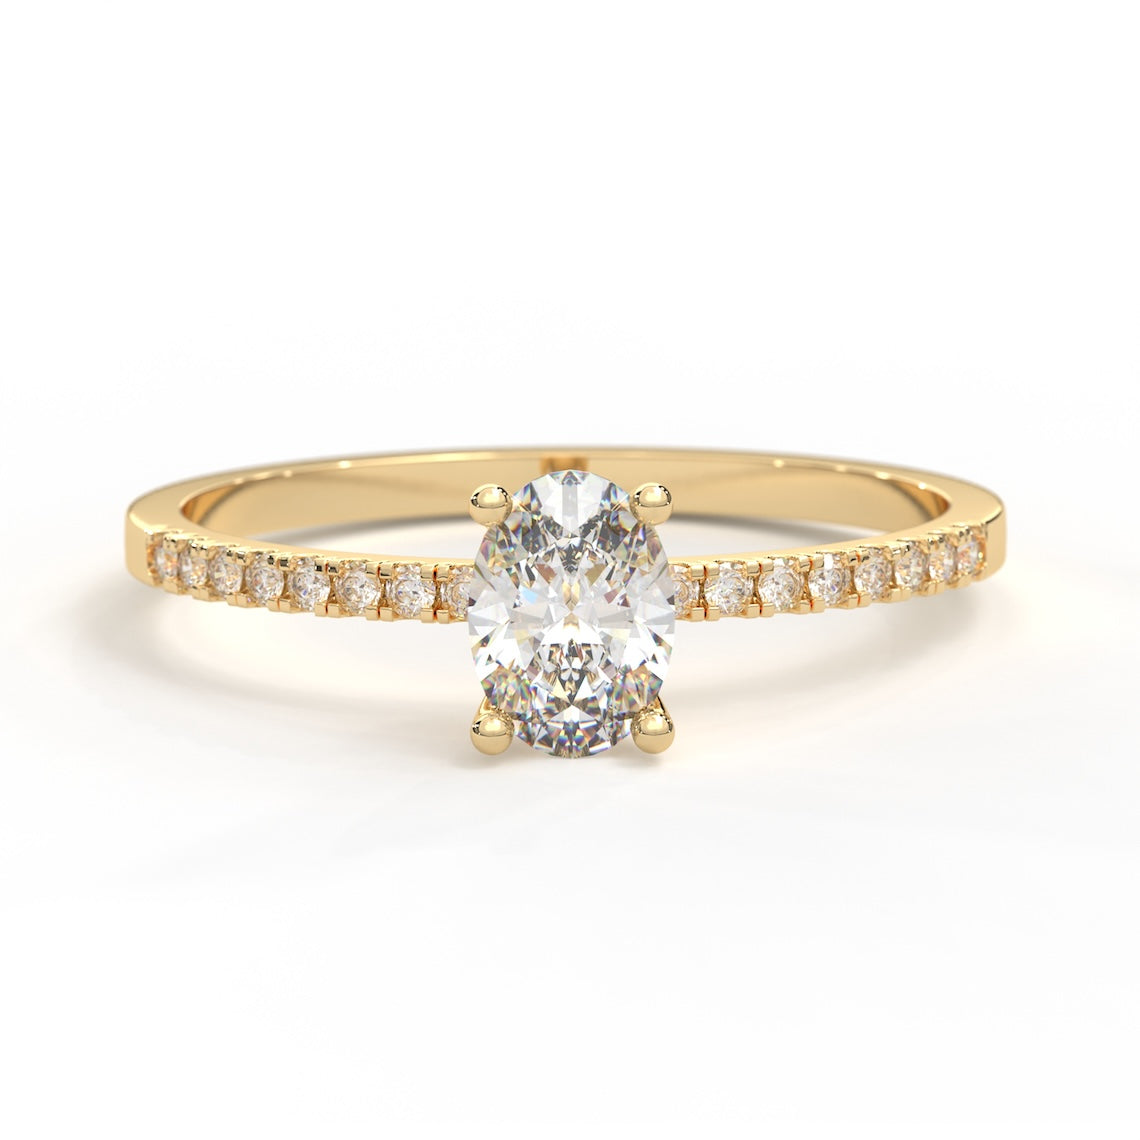 Oval Cut Solitaire Diamond Ring 14k Gold